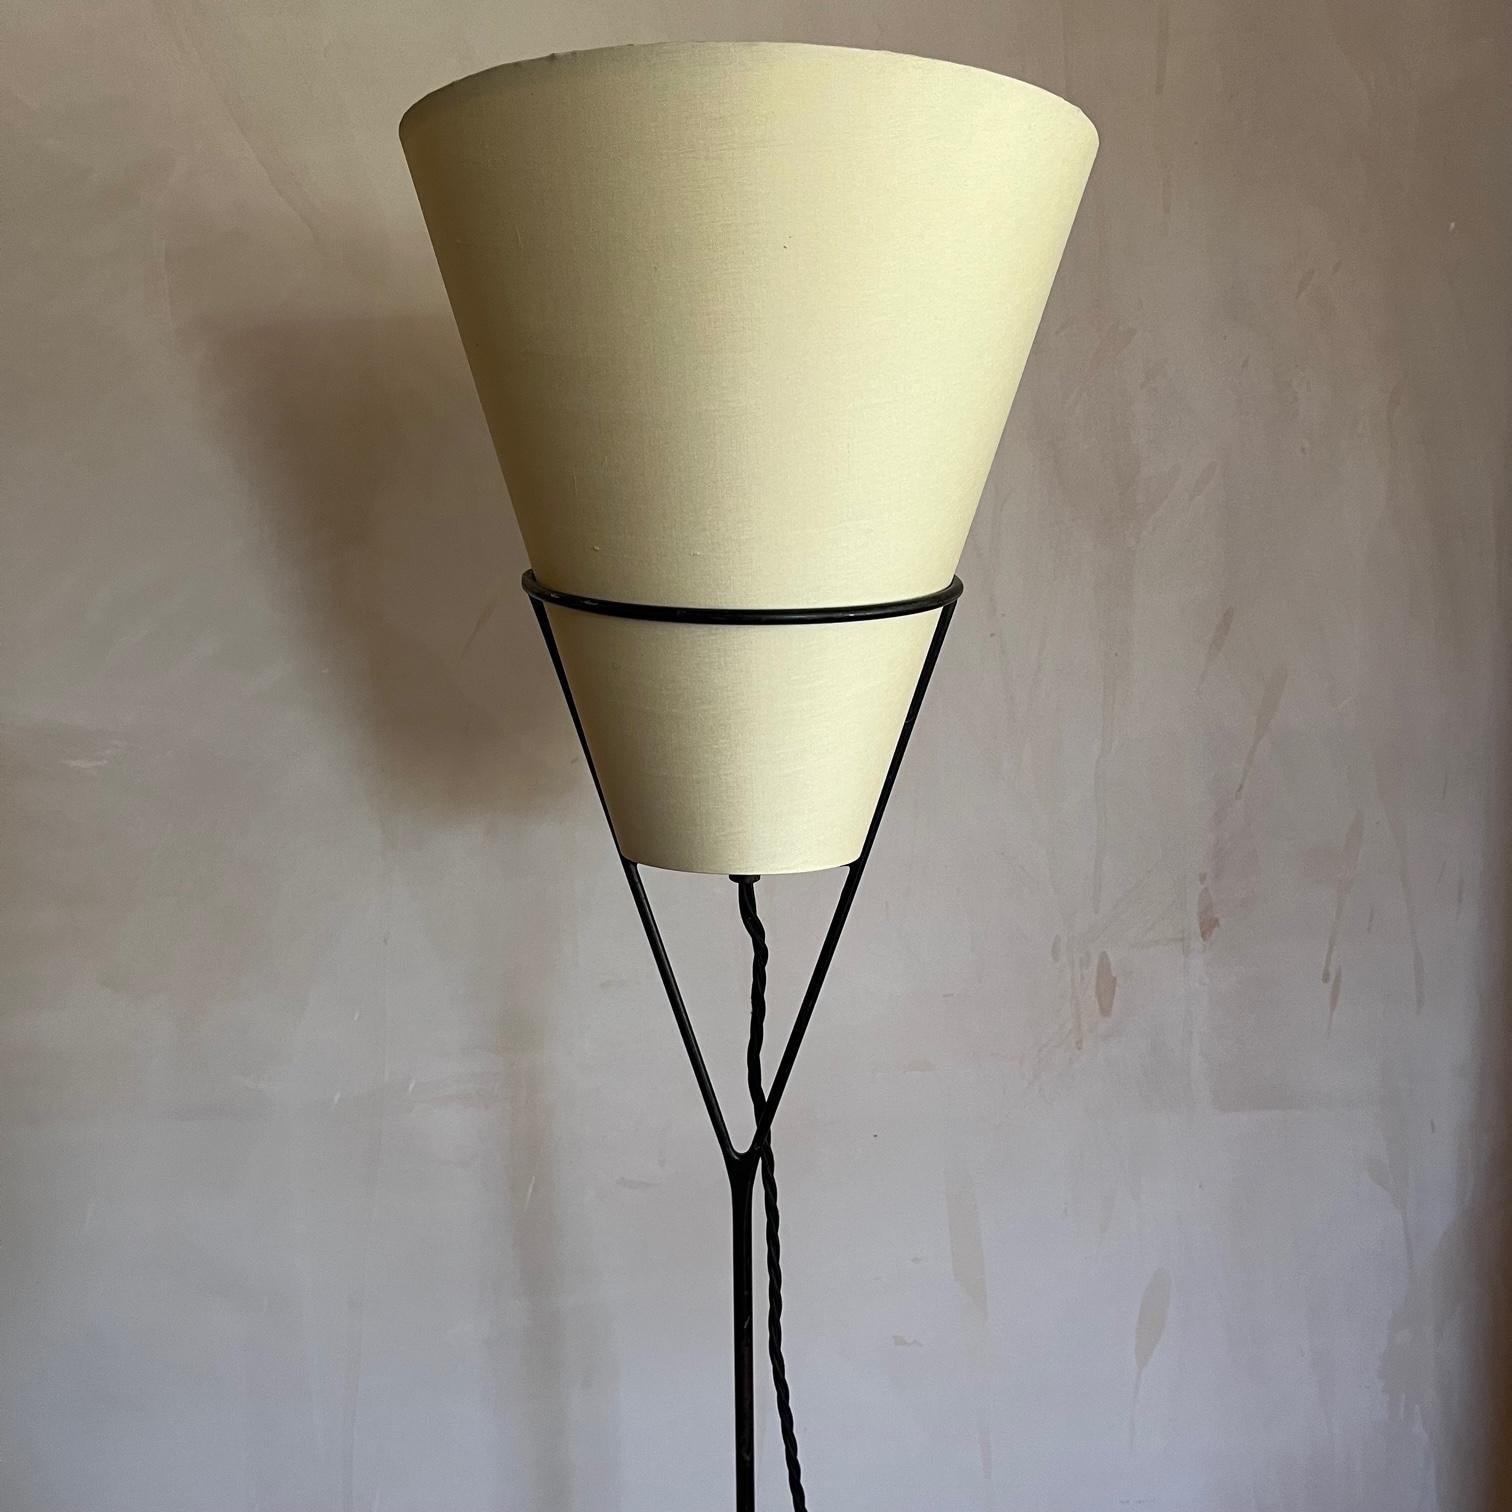 A mid-century original  Vice Versa or Topsy Turvy  floor lamp. Made from cast iron and designed by Carl Aubock, Vienna, 1951-1952 and executed by Werkstätte Carl Auböck.
A good early example of this lamp. Some distortion to the ring, which should be